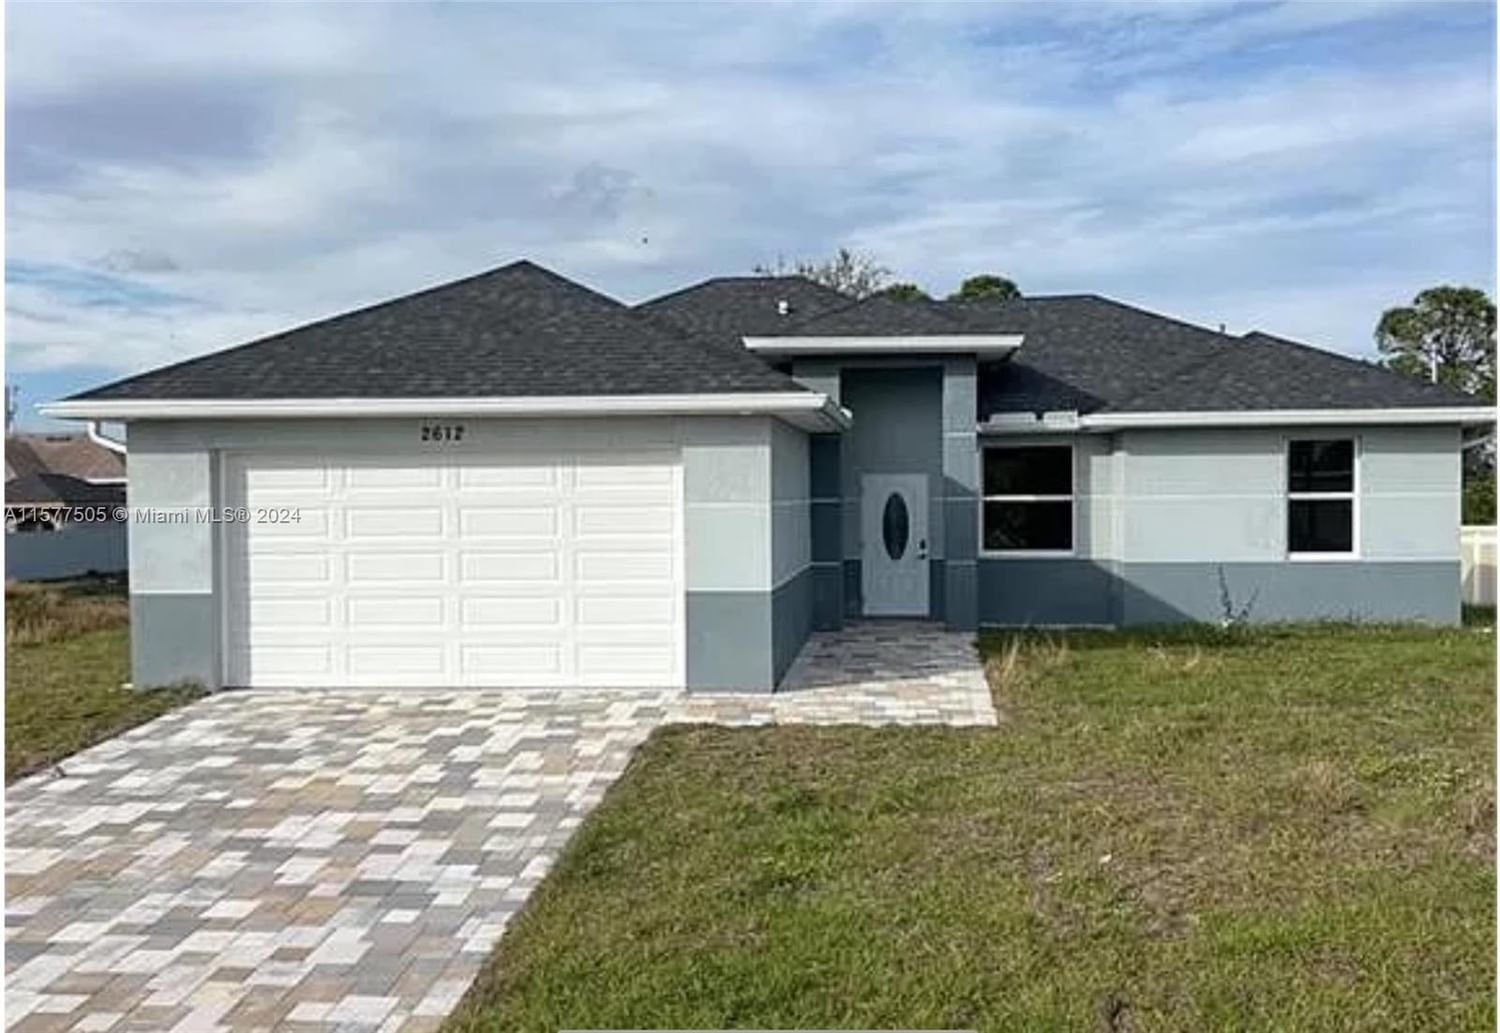 Real estate property located at 2612 19th st, Lee County, LEHIGH ACRES, Lehigh Acres, FL